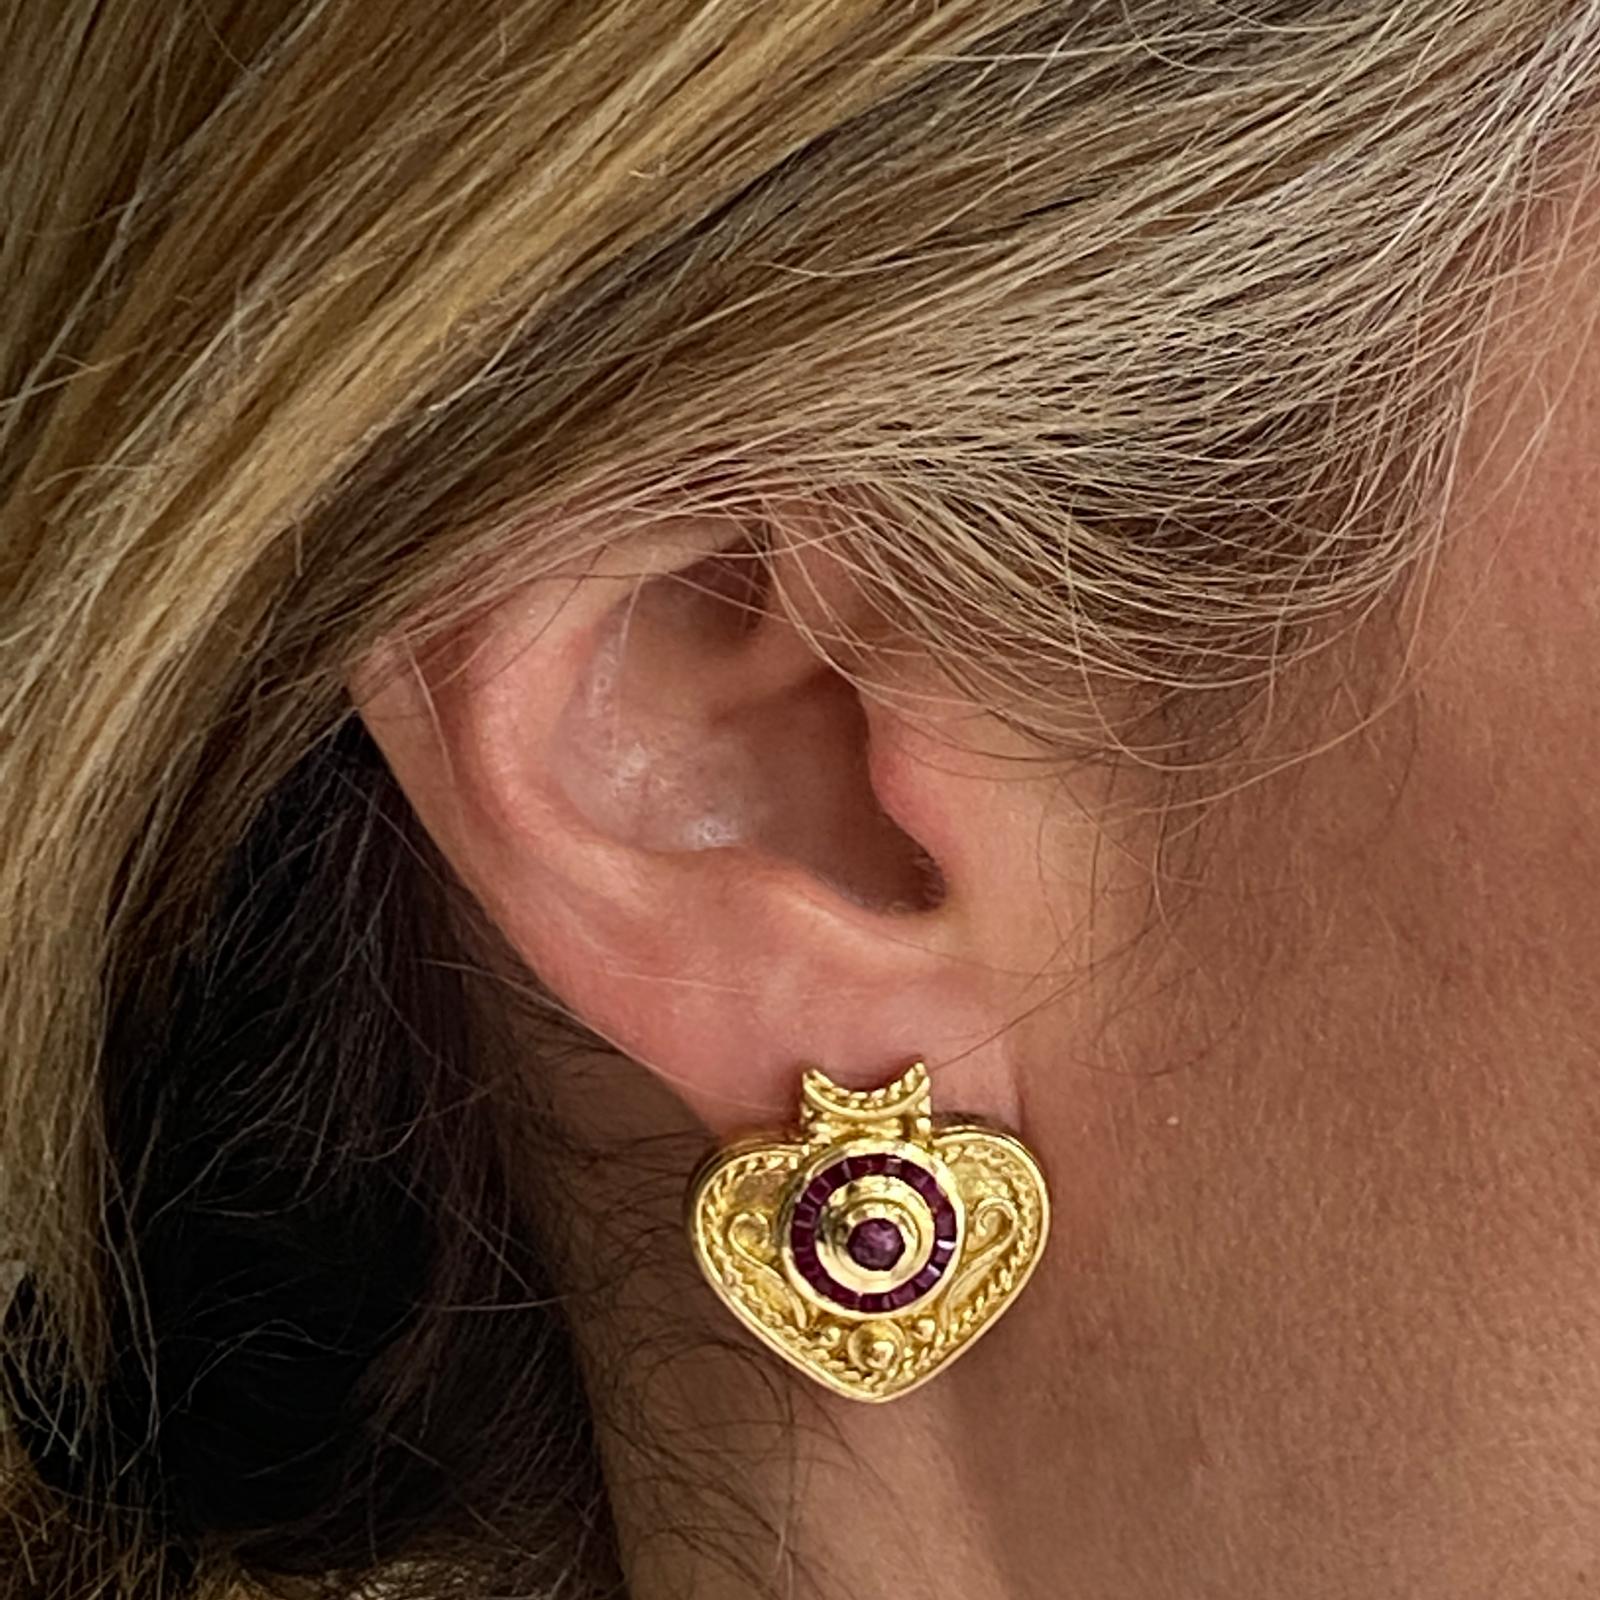 Etruscan style heart earrings fashioned in 18 karat yellow gold. The earrings feature square cut and cabochon natural ruby gemstones set in an Etruscan style gold design featuring scroll and interlocking circle designs with bead spacers. The